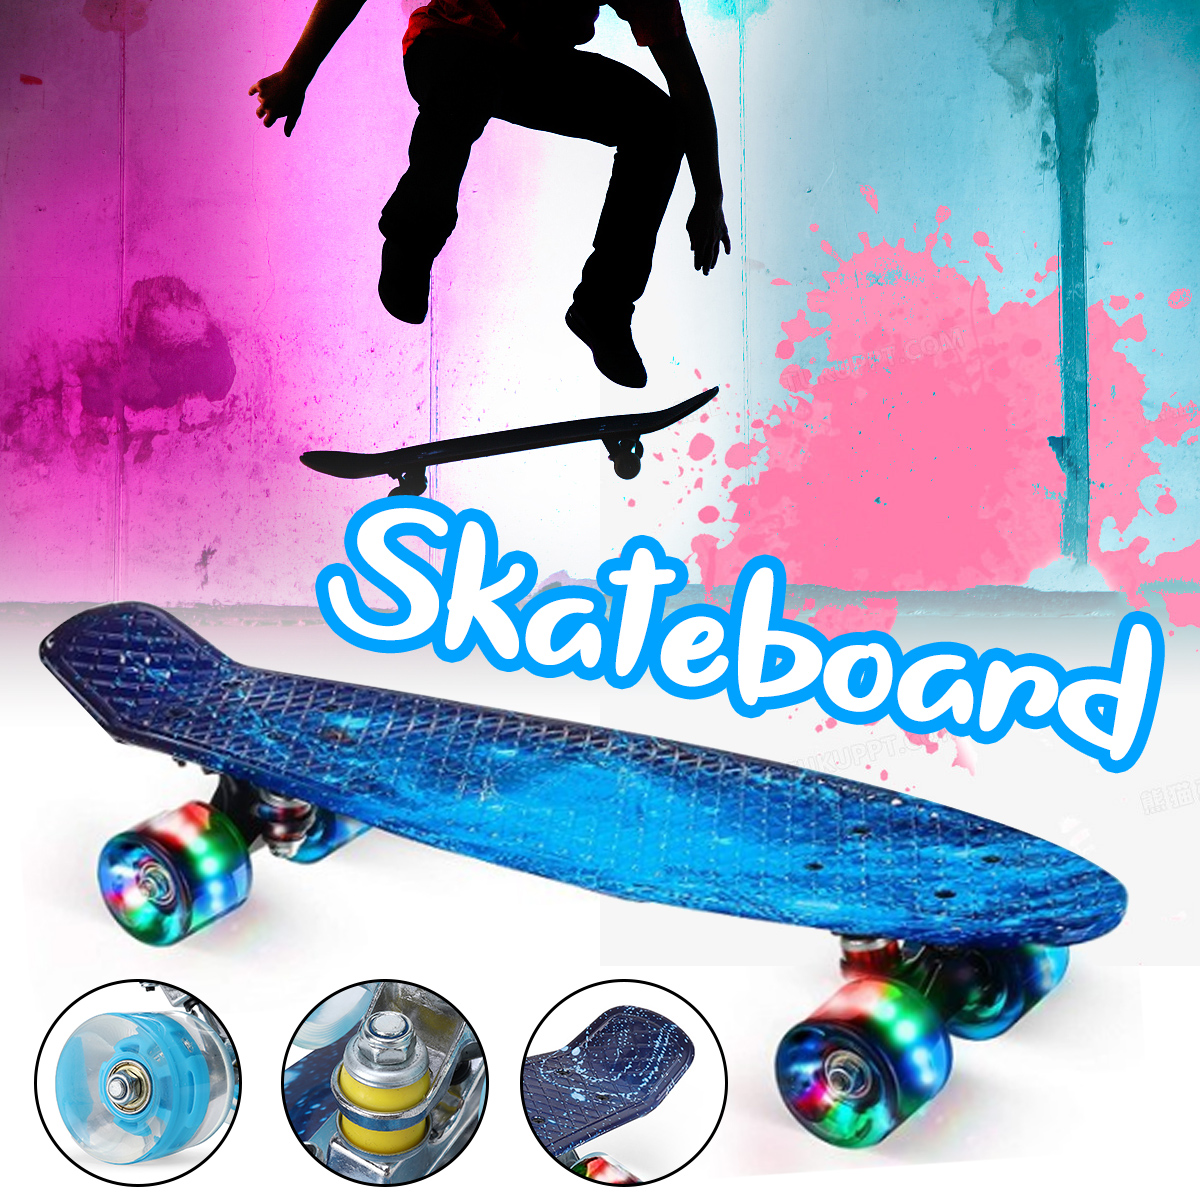 Girls and Beginners for Kids GYMAX Mini Cruiser Skateboard Boys 22 Complete Retro Plastic Skateboards with Light Up Wheels 